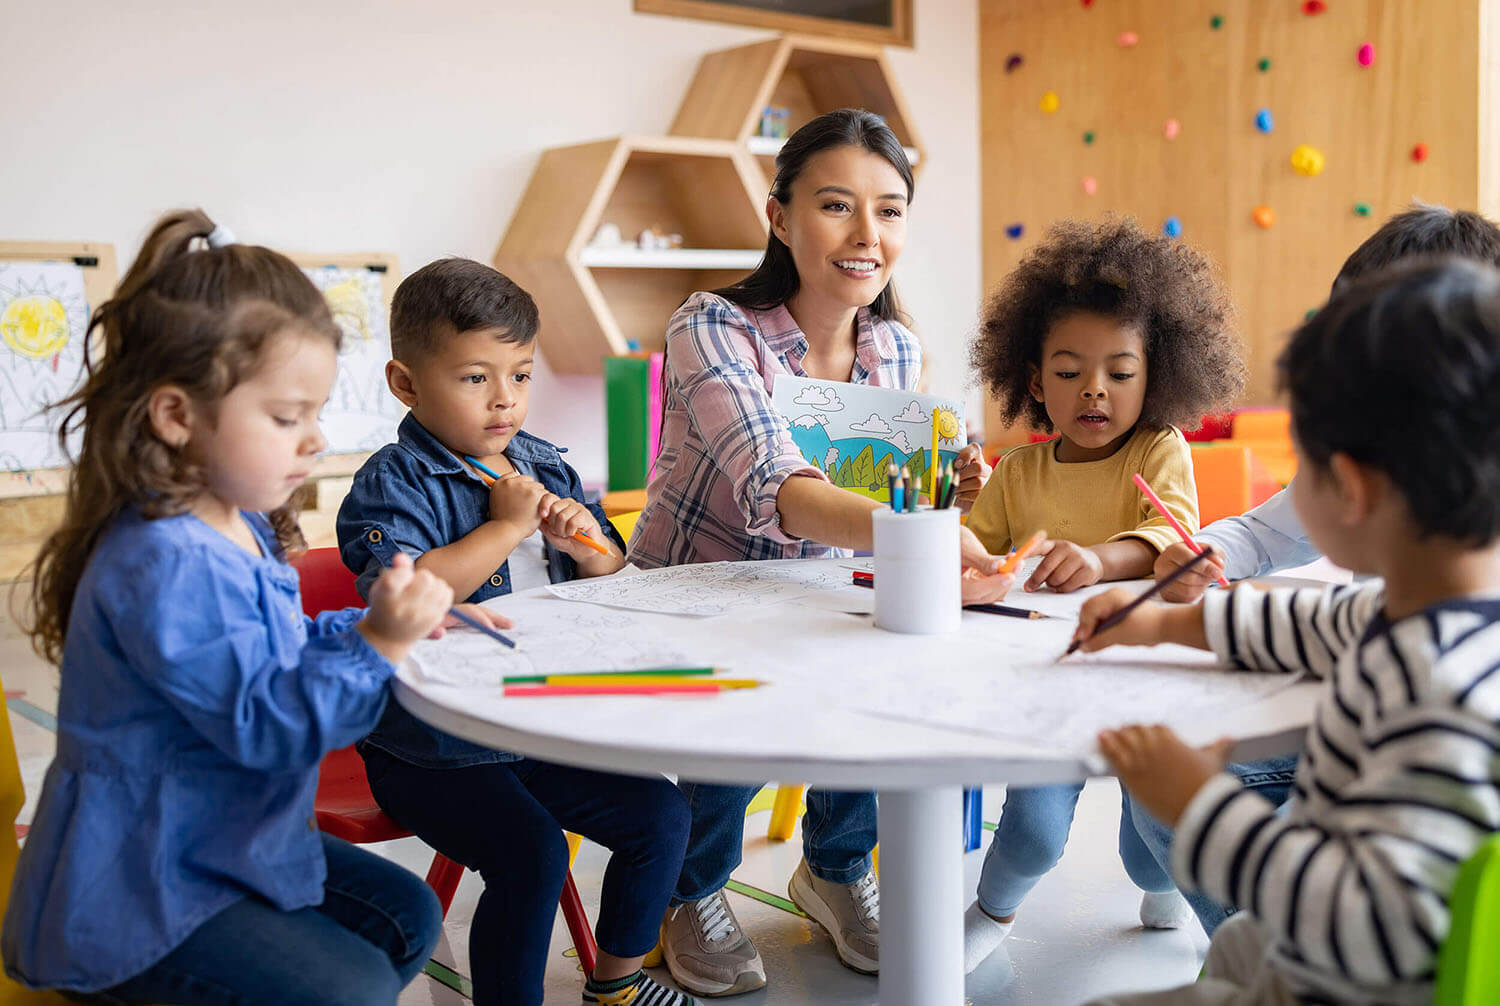 A diverse group of preschool children gather around a teacher as she reads a book in a safe and nurturing environment. Early childhood development and learning through play are encouraged.